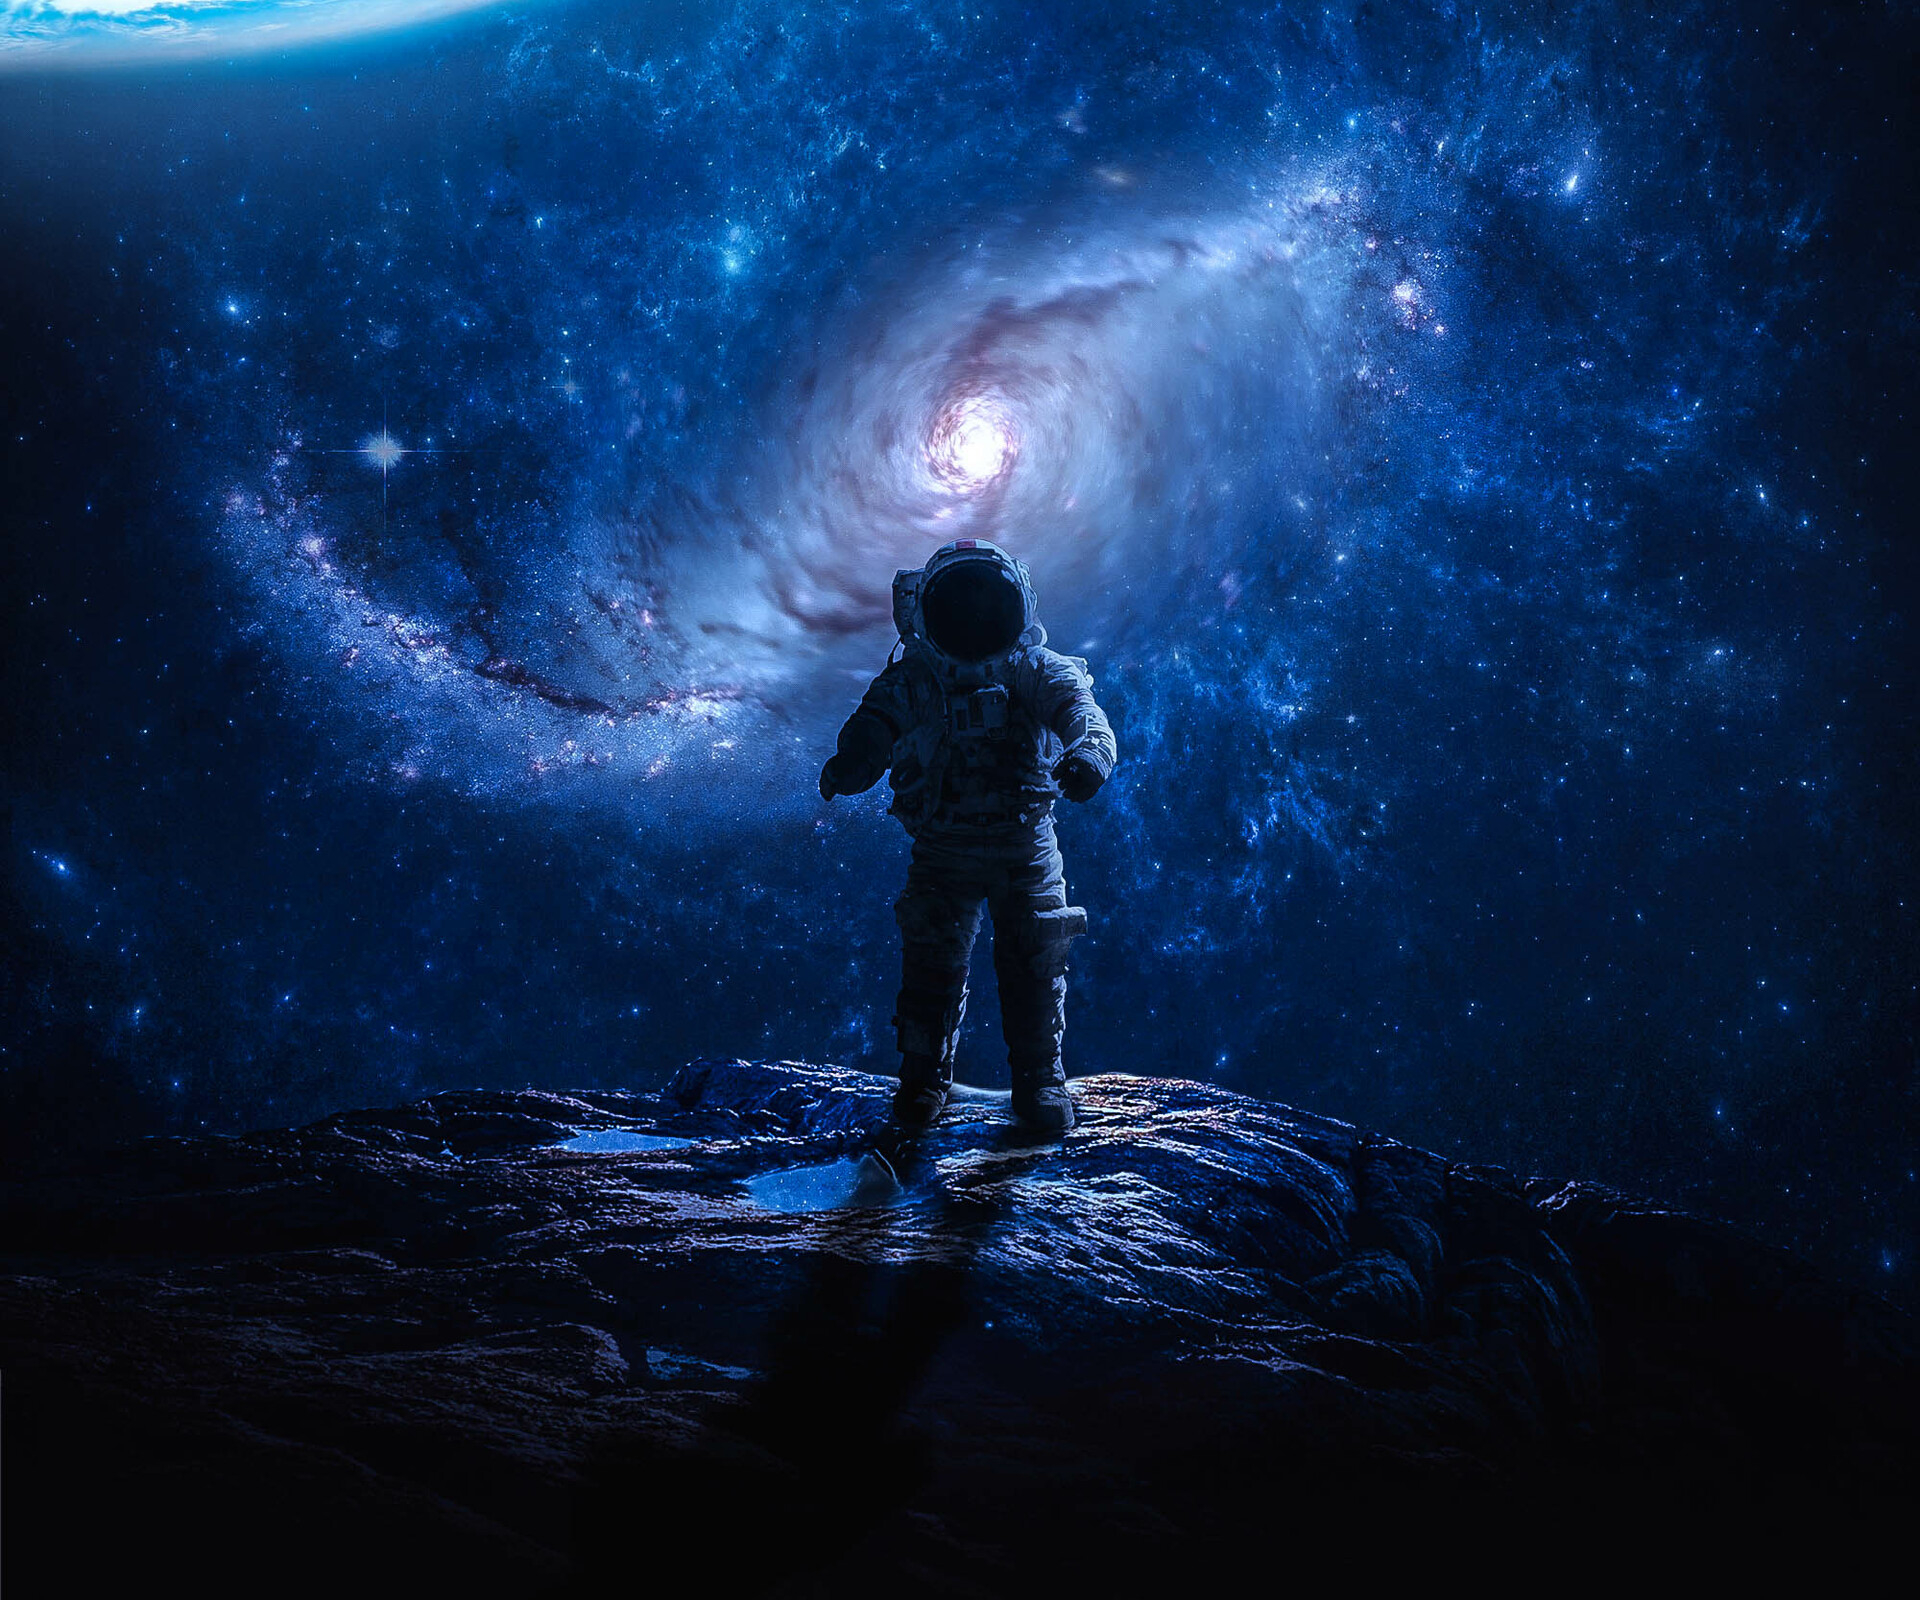 2560x14402020616 Astronaut Lost in Space 2560x14402020616 Resolution